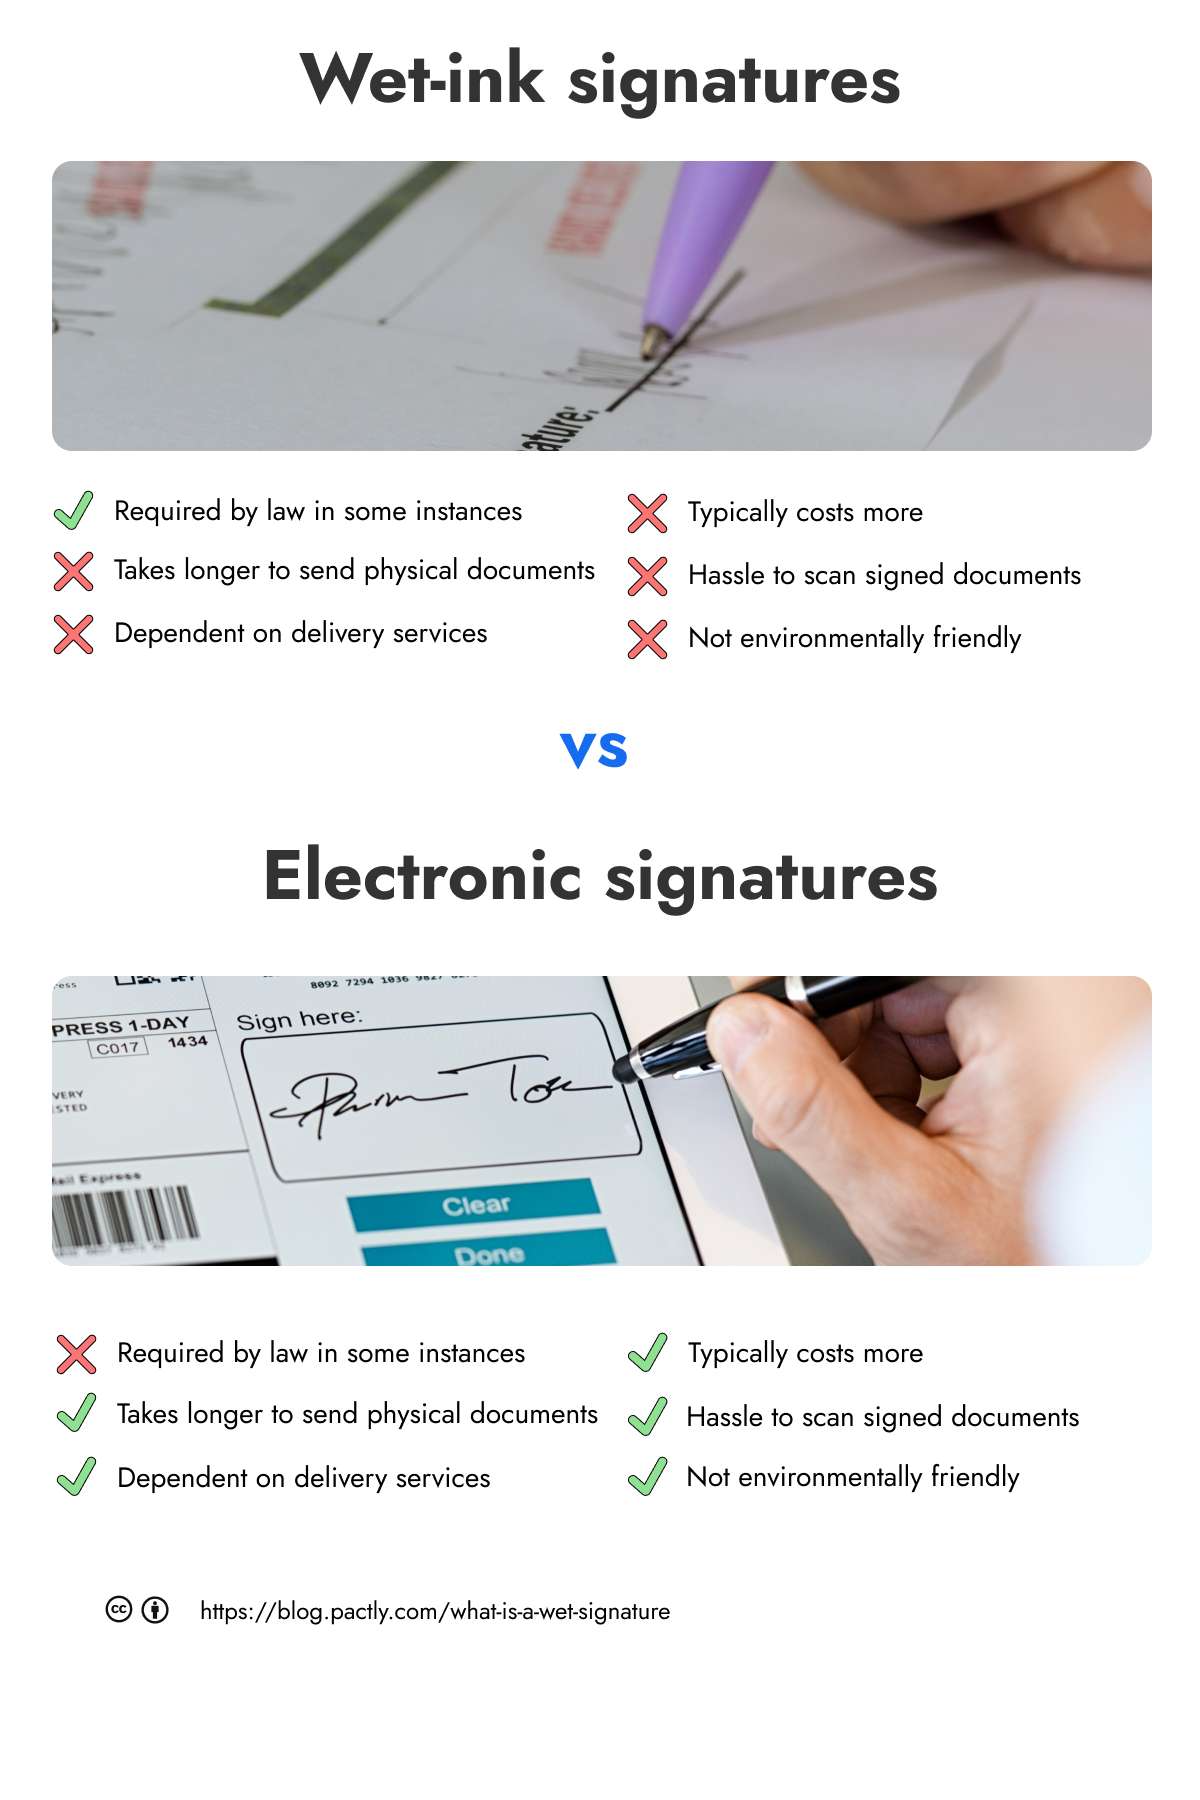 Image comparing the benefits of wet signatures vs electronic signatures